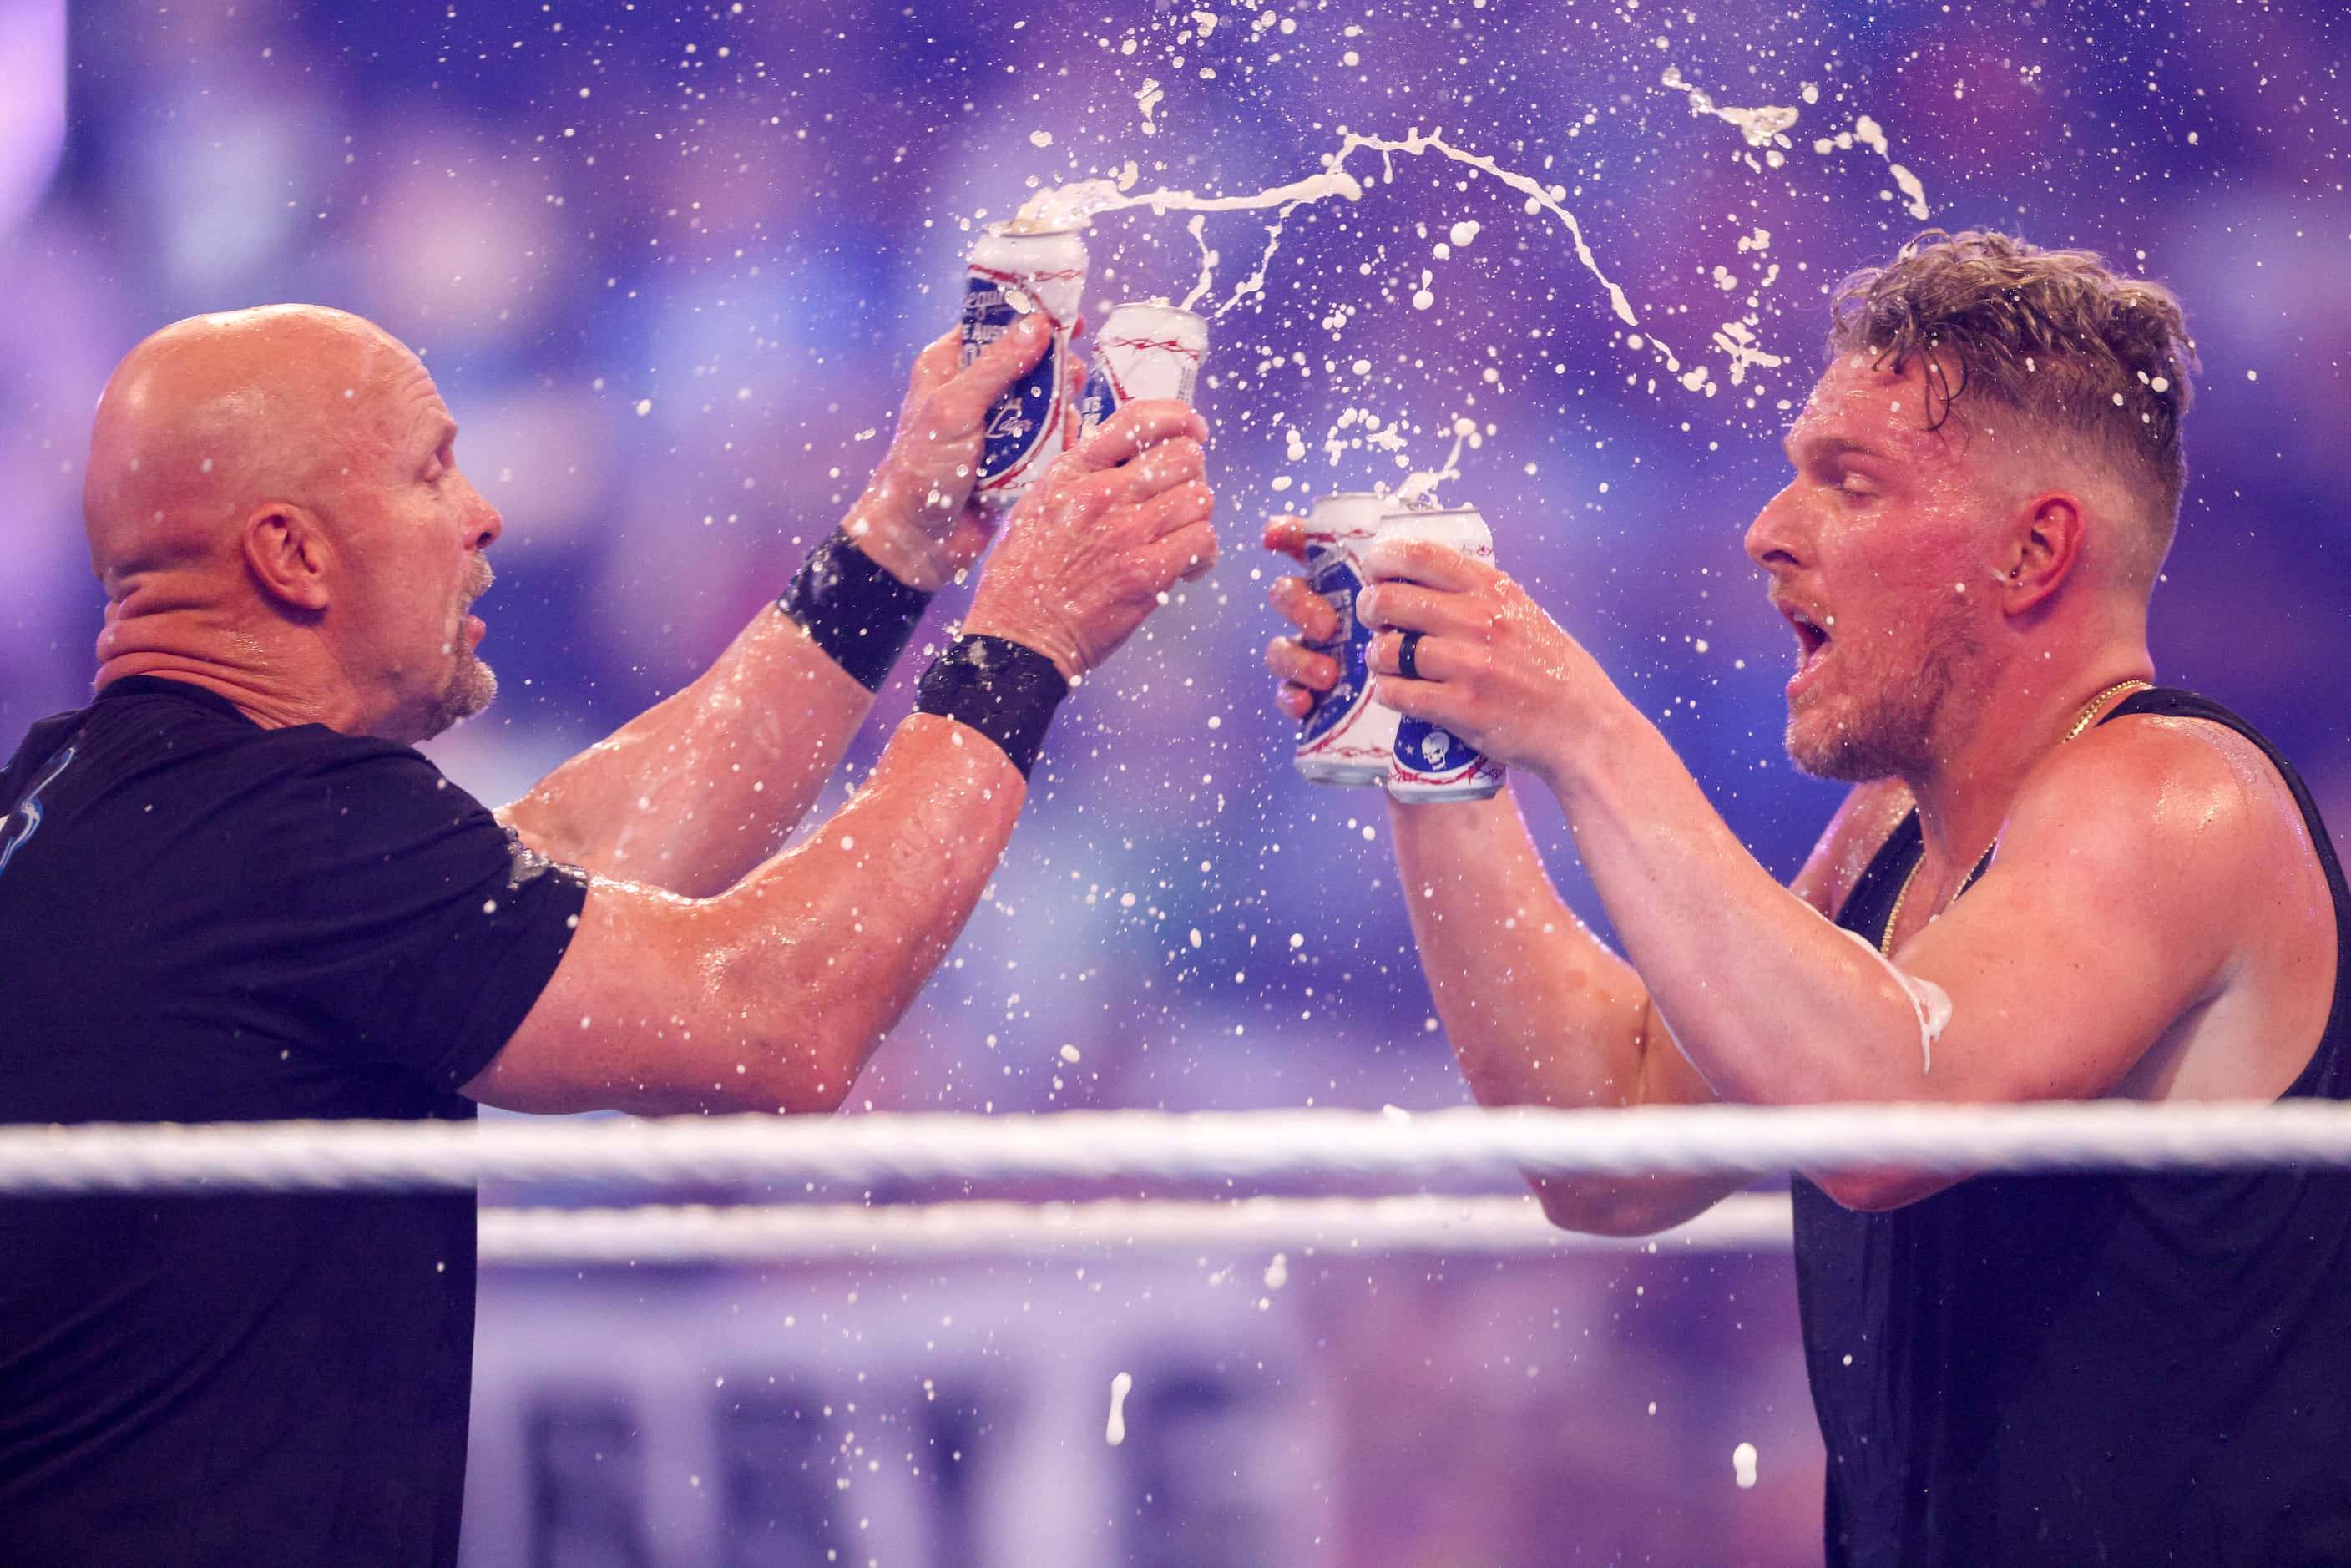 “Stone Cold” Steve Austin toasts beer with Pat McAfee after a match at WrestleMania Sunday...